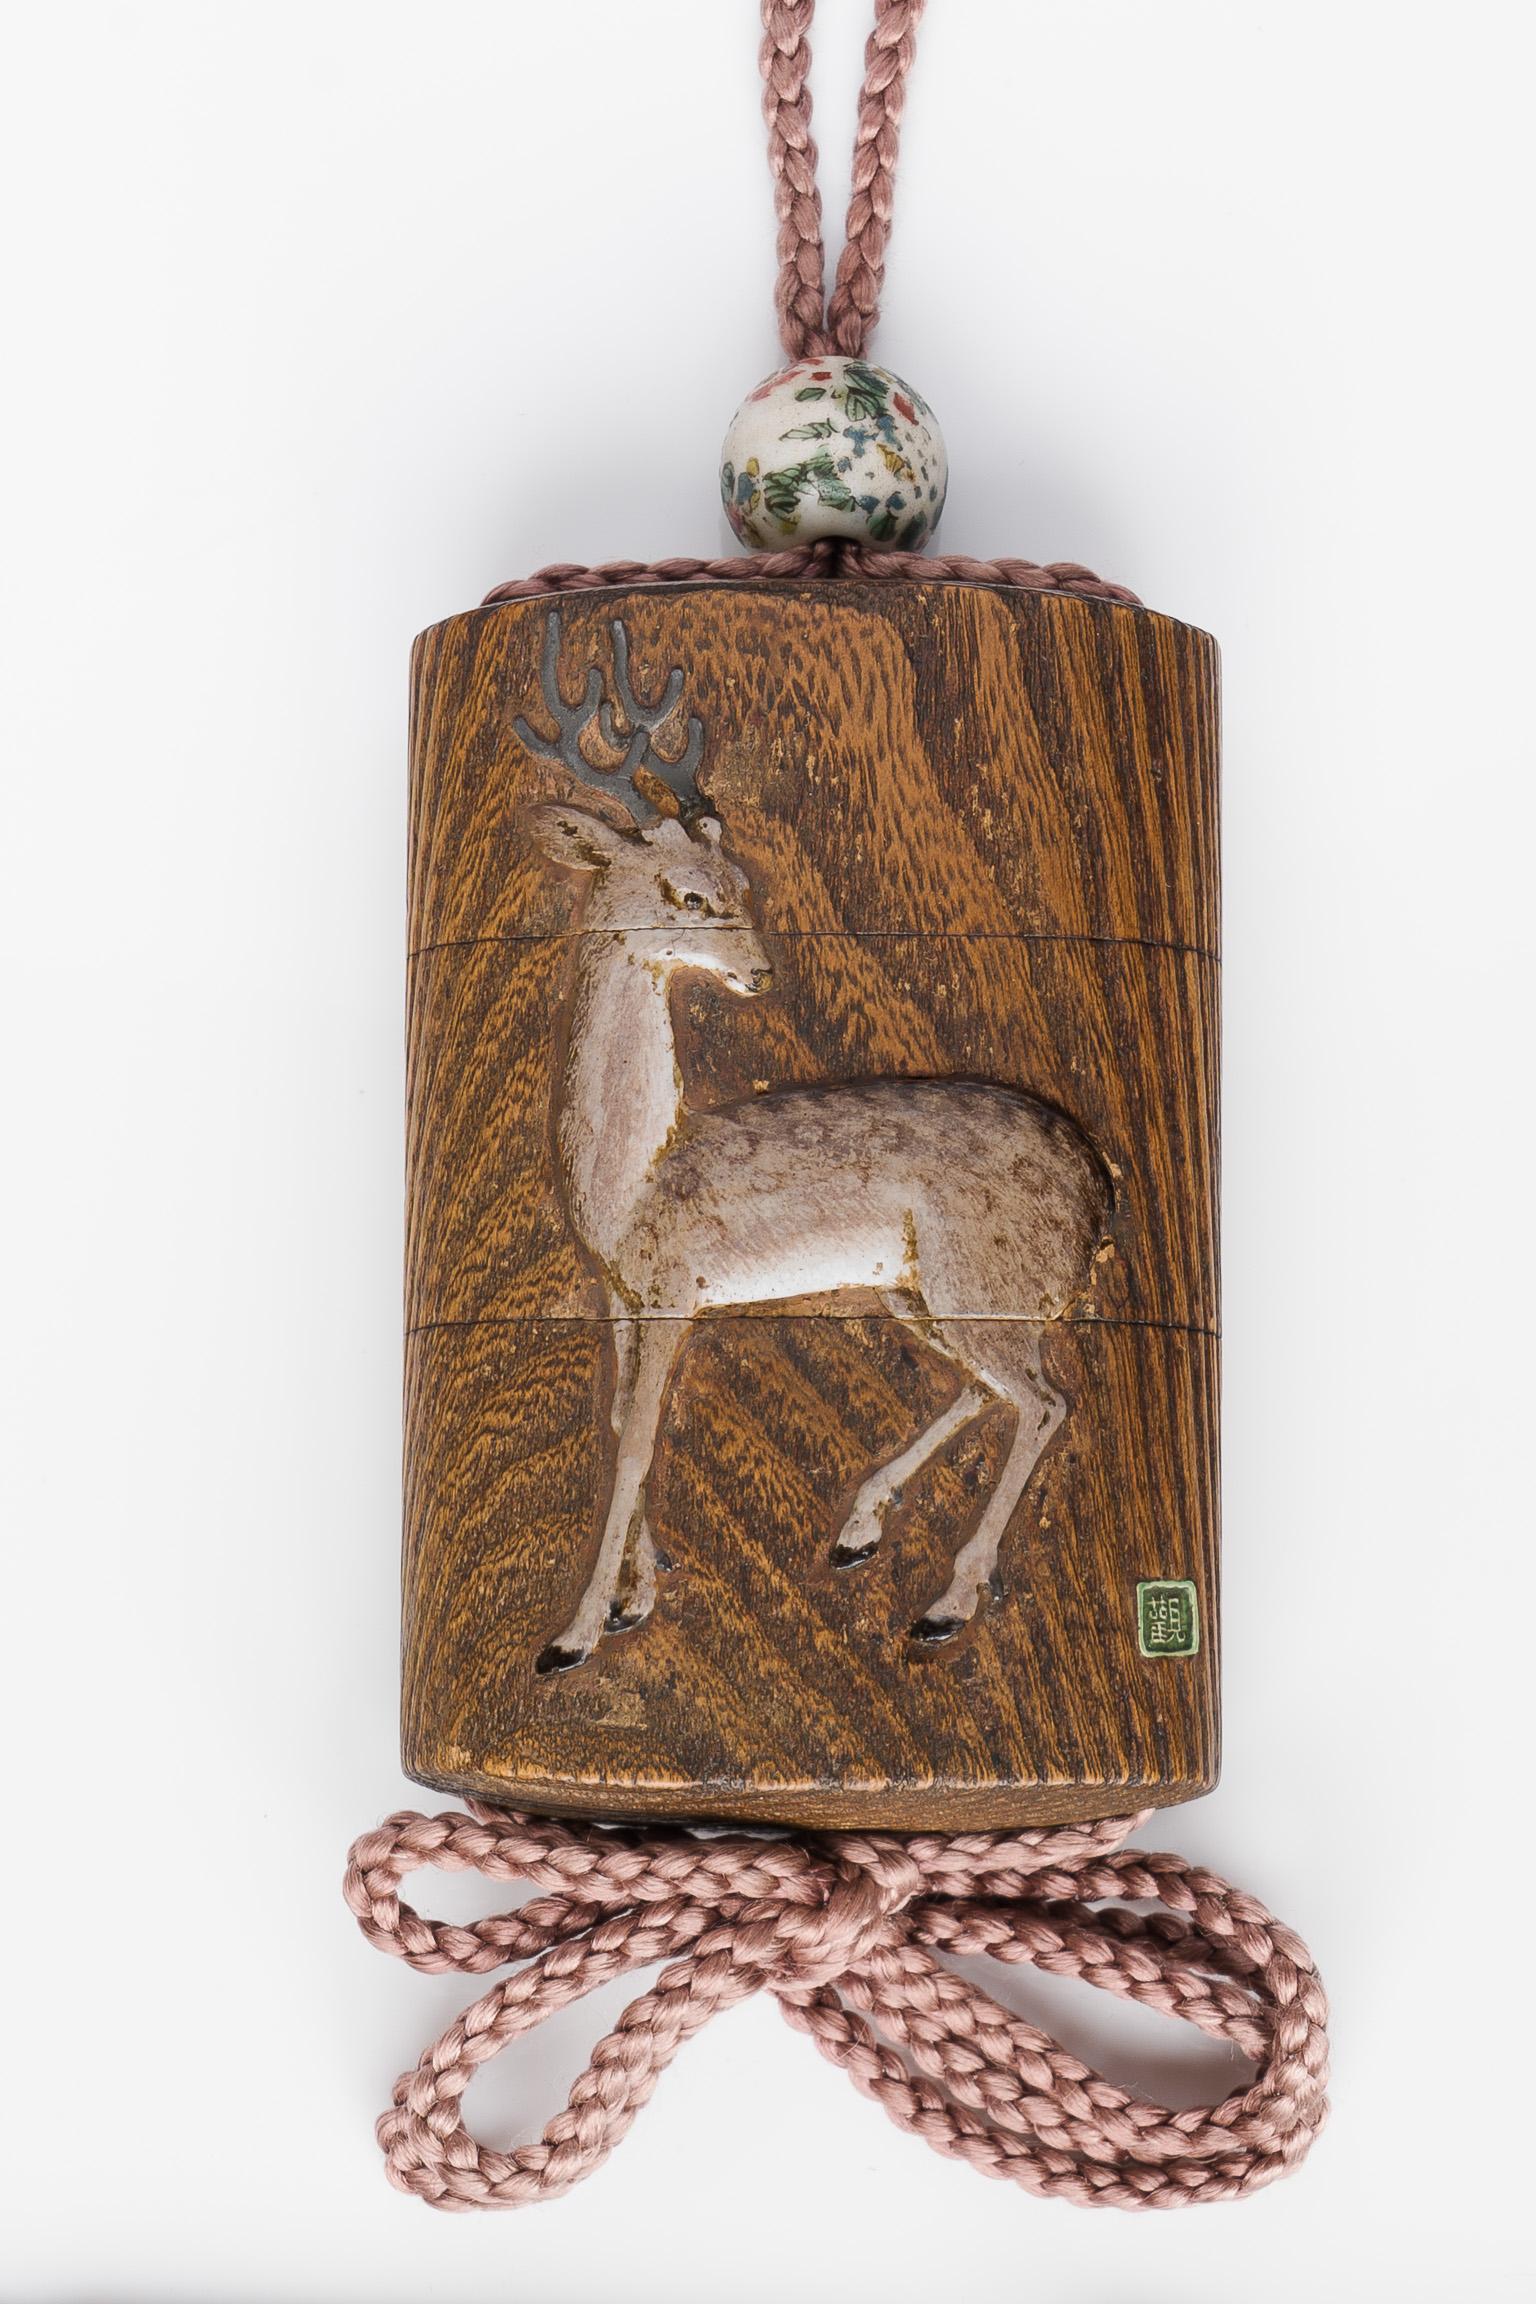 Mochizuki Hanzan (1743-90?)
Edo Period, 18th century

Decorated with inlaid colored ceramic with a stag and maple leaves

Height: 8.4 cm

Sealed Hanzan

 

Mochizuki Hanzan (1743-90?) was one of the most talented followers of Ogawa Haritsu